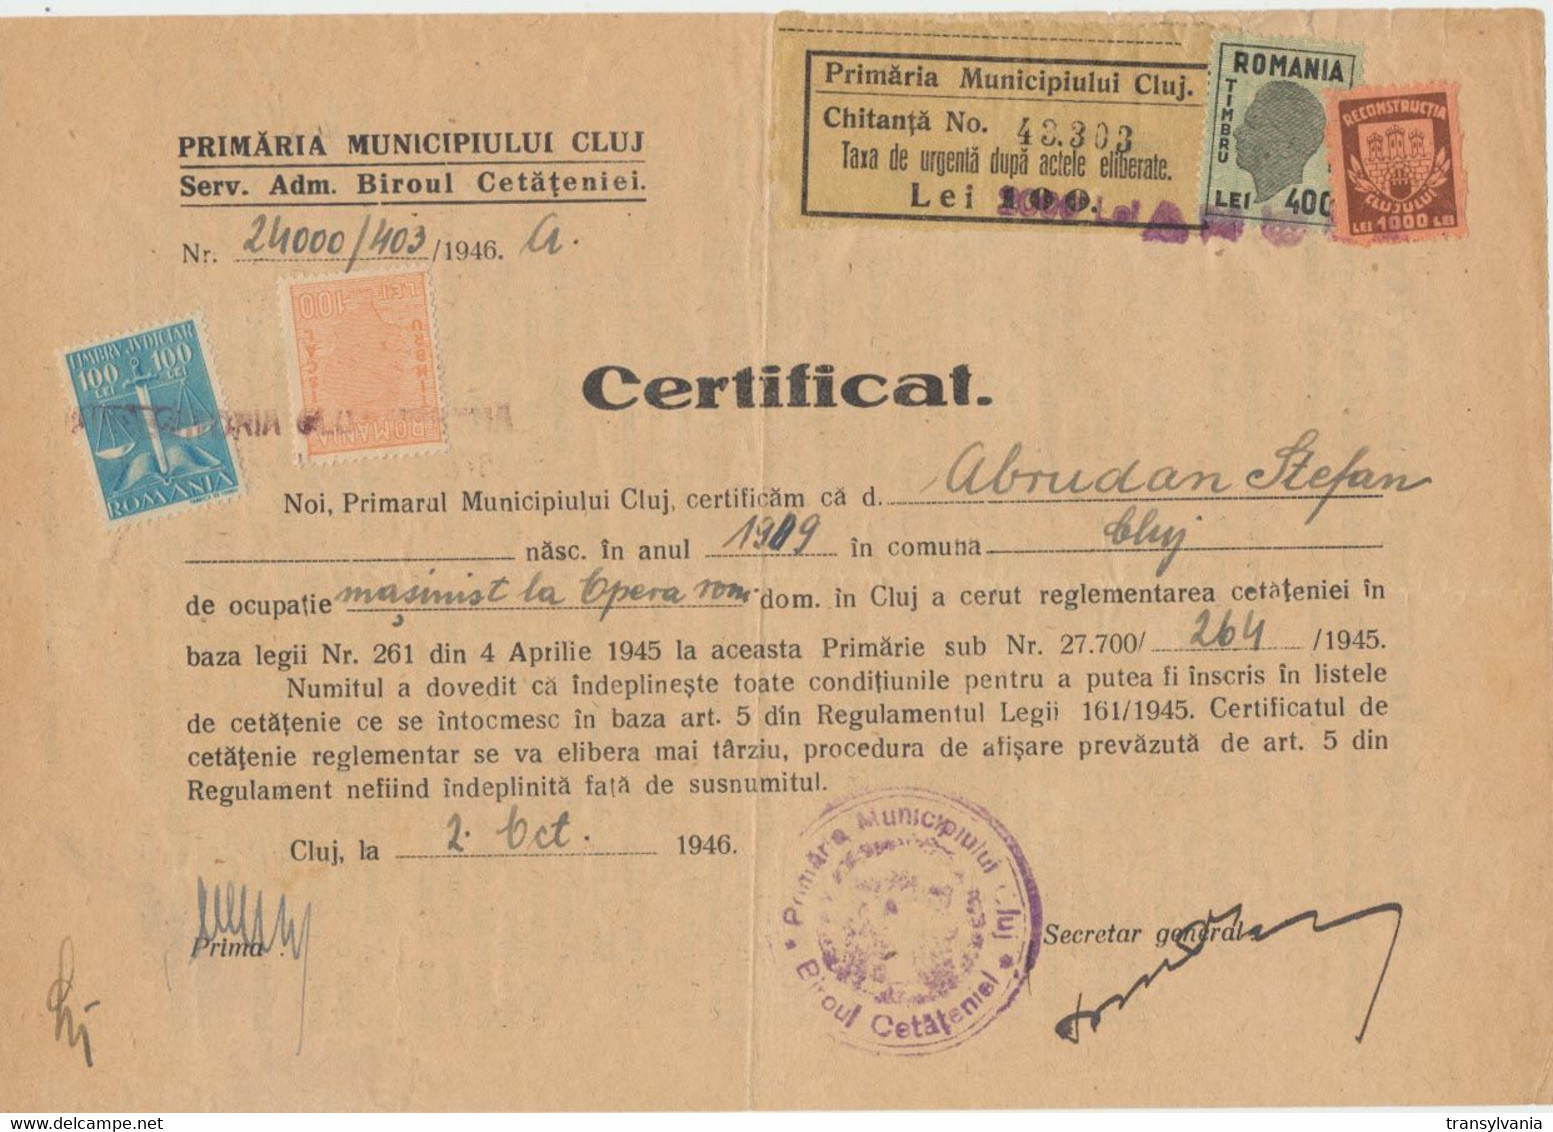 Romania 1946 Certificate Printed On Hungary WW2 Occupation Paper By Cluj Mayoralty - 2 Municipal Revenue Stamps - Fiscales